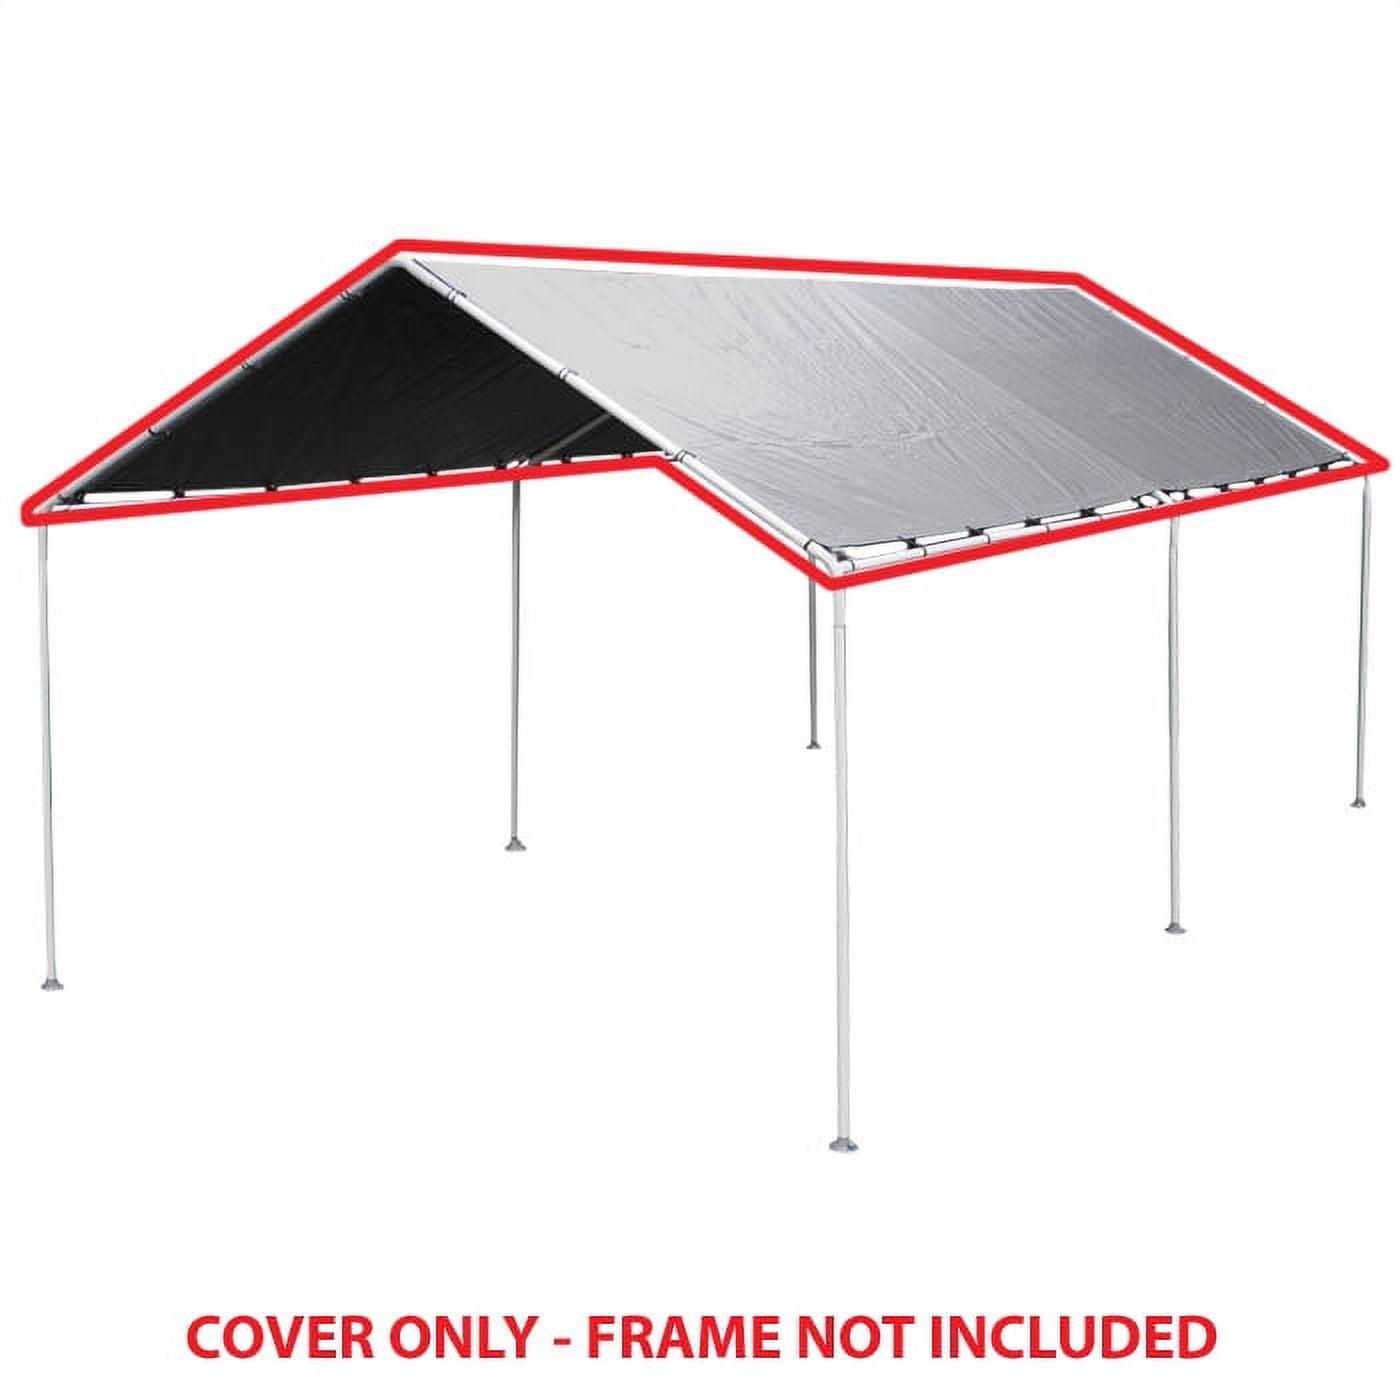 Carport Replacement Canopy Cover Replacement Tarp Carport Cover 10 x 20 ft